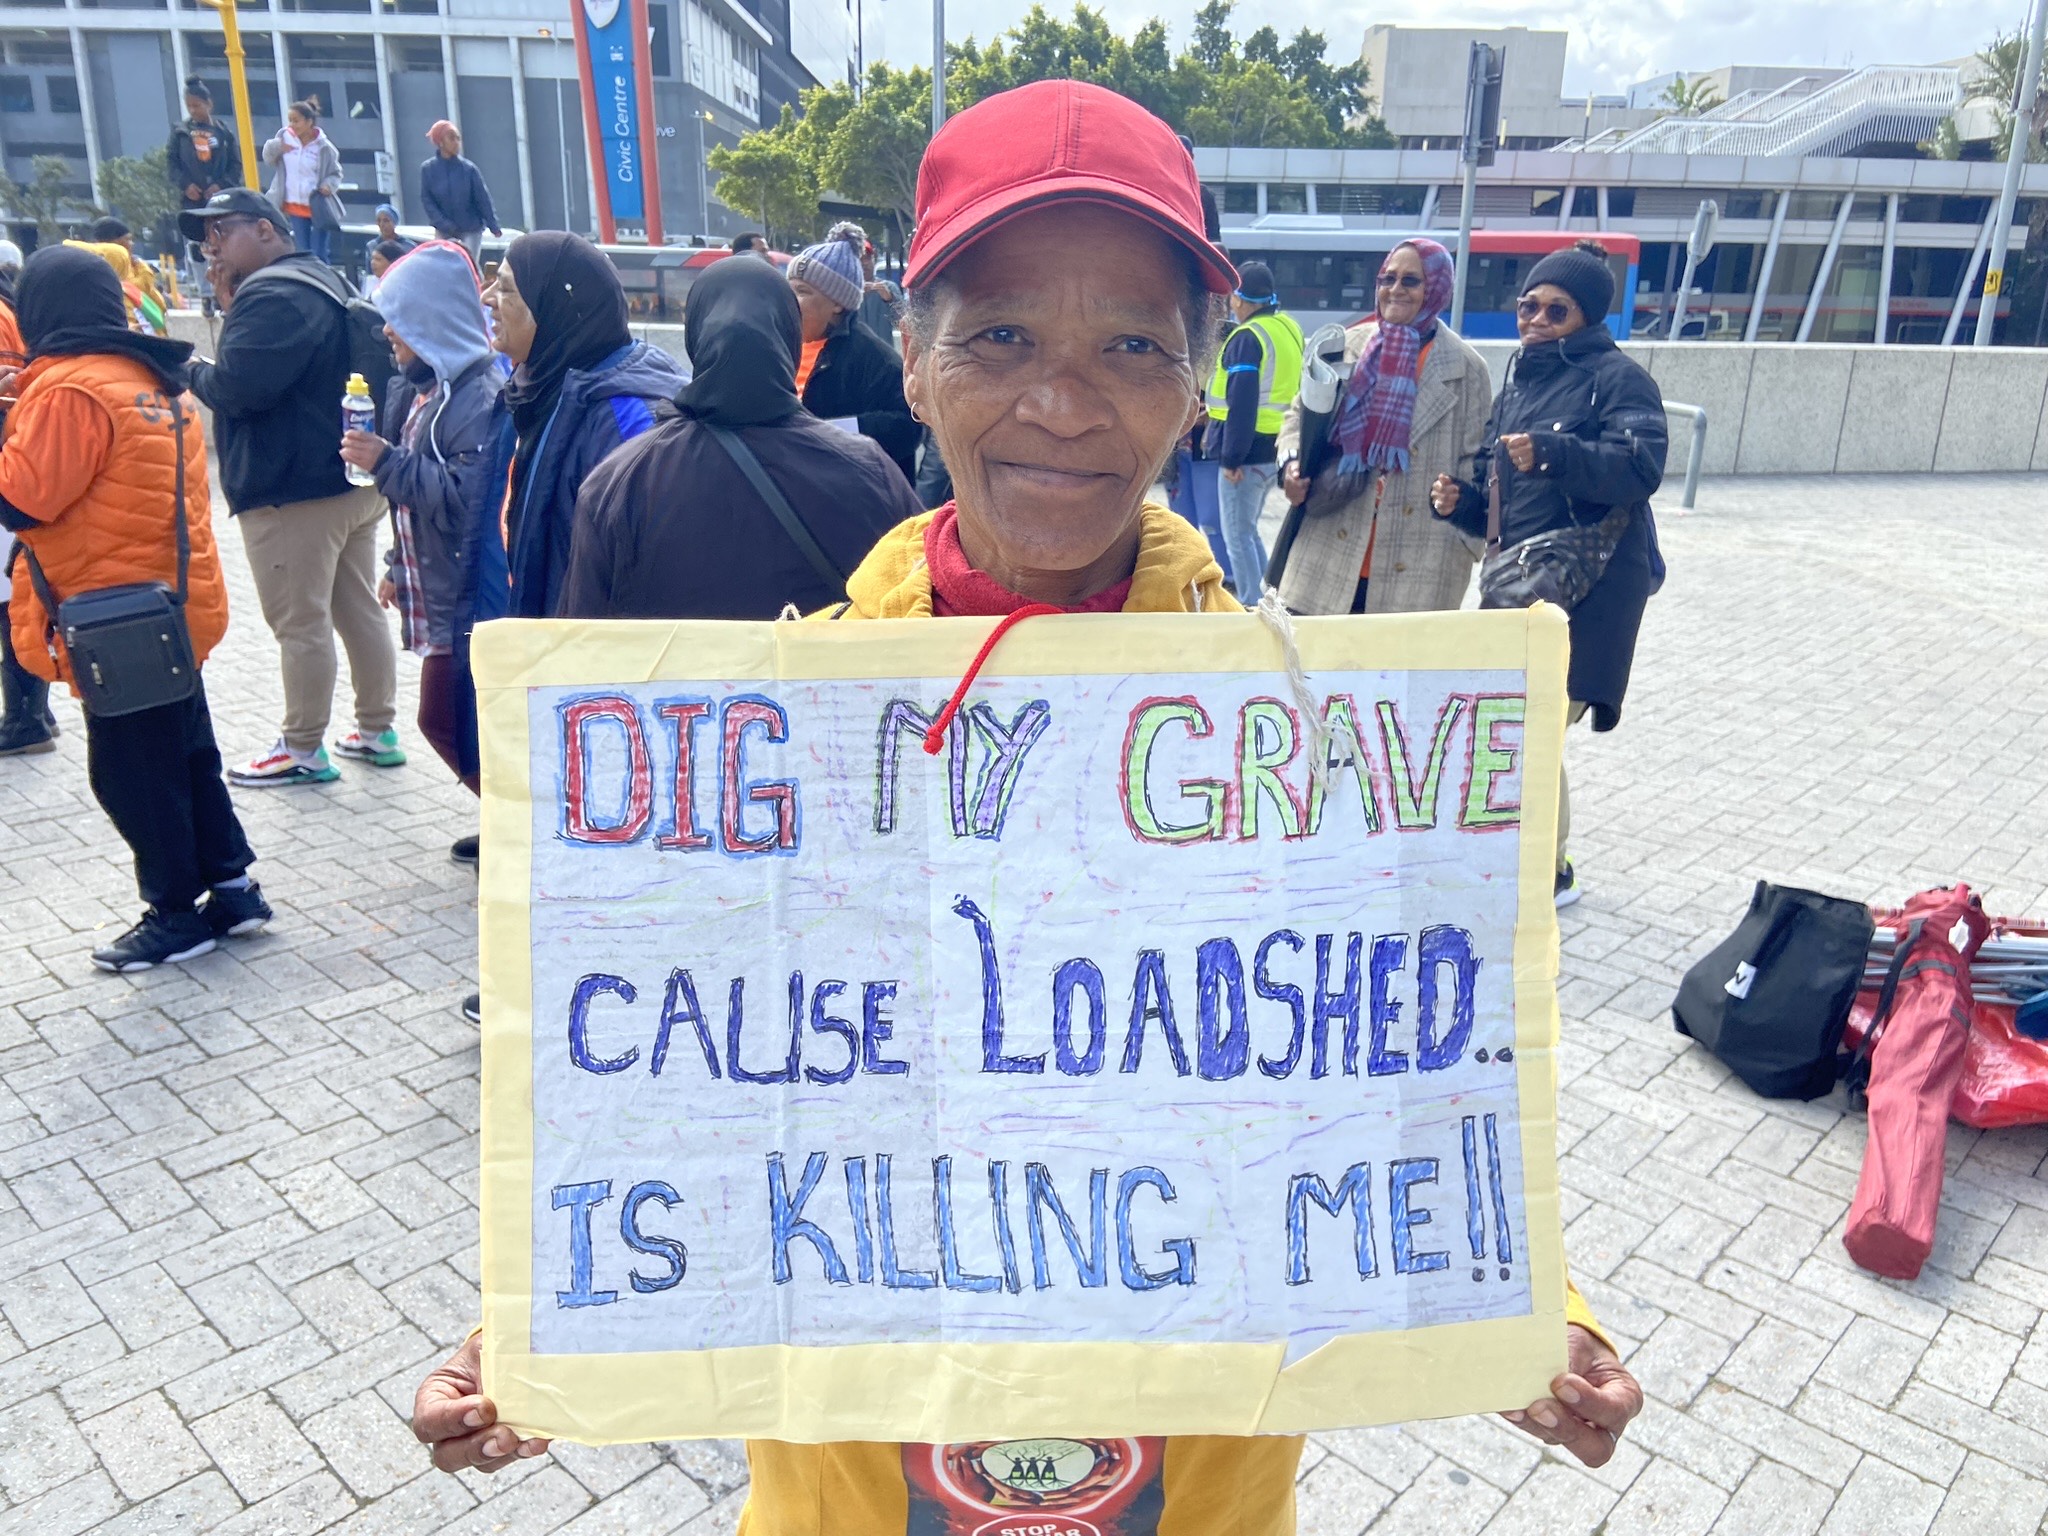 Capetonians took to the street to voice their grievances about the 17.6% rise in electricity prices